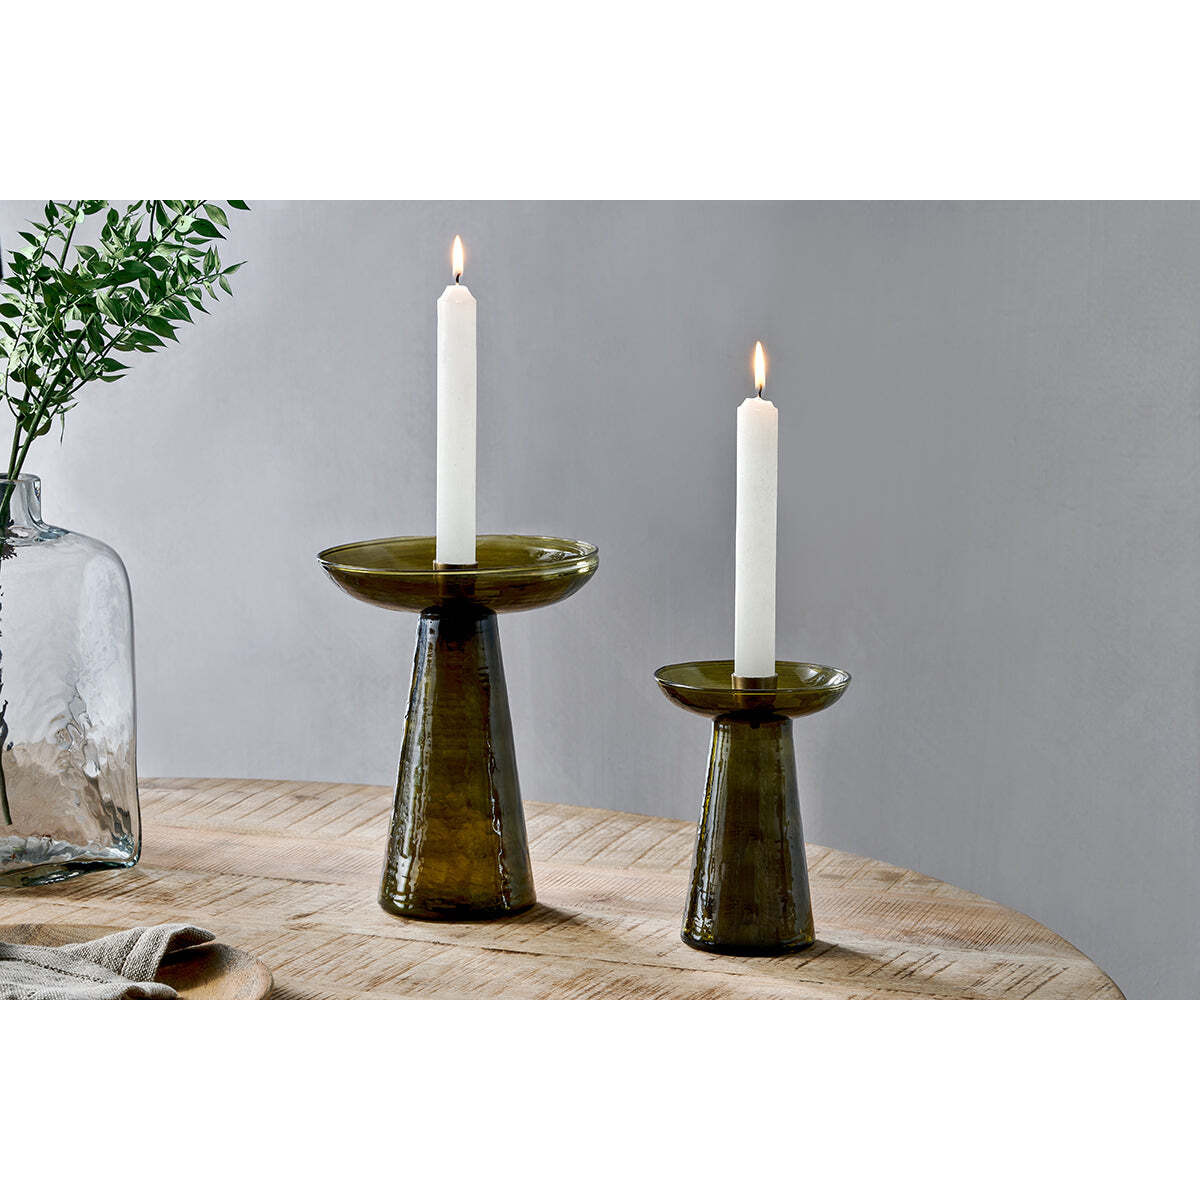 nkuku Avyn Recycled Glass Candle Holder - Candles Holders & Lanterns - Forest Green - Small